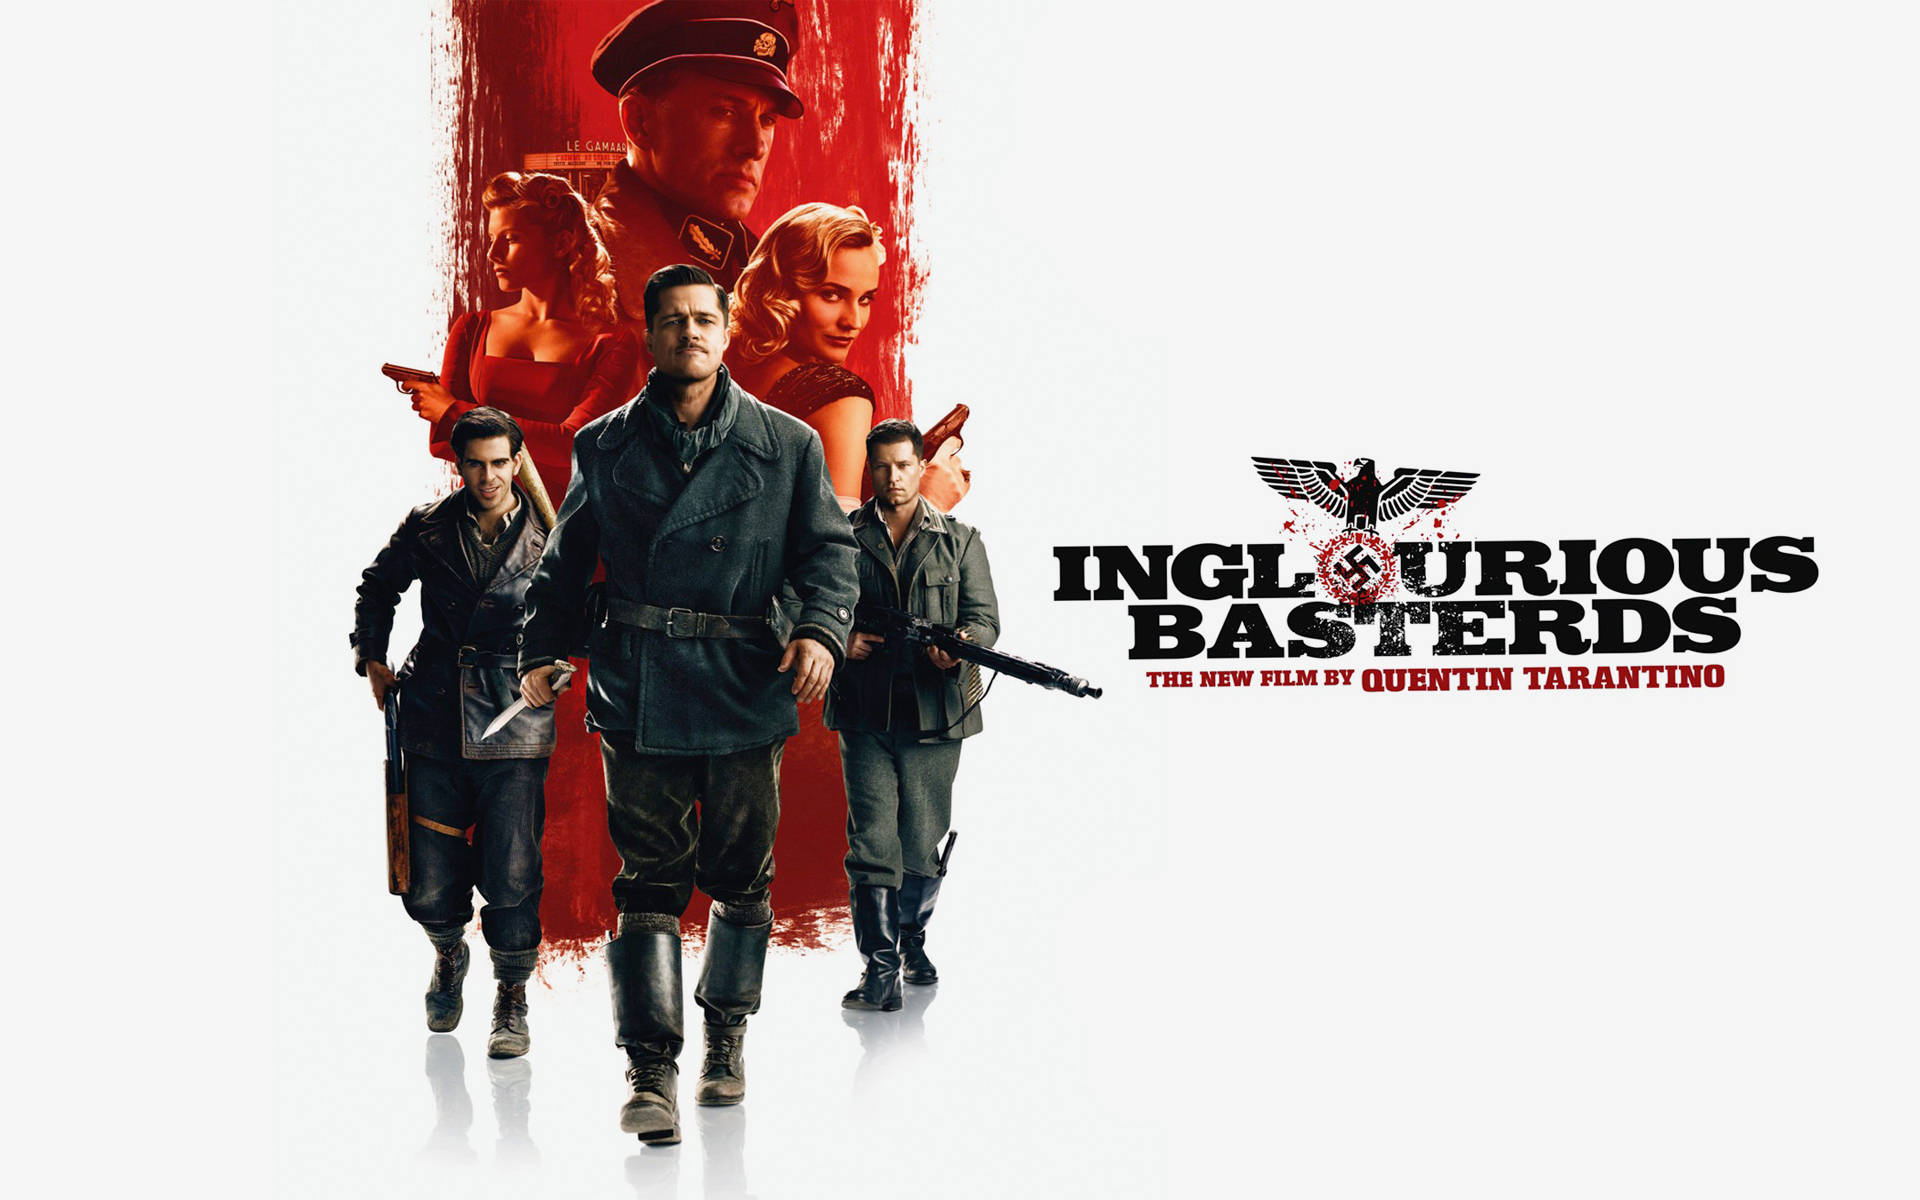 Inglourious Basterds Theatrical Poster Background